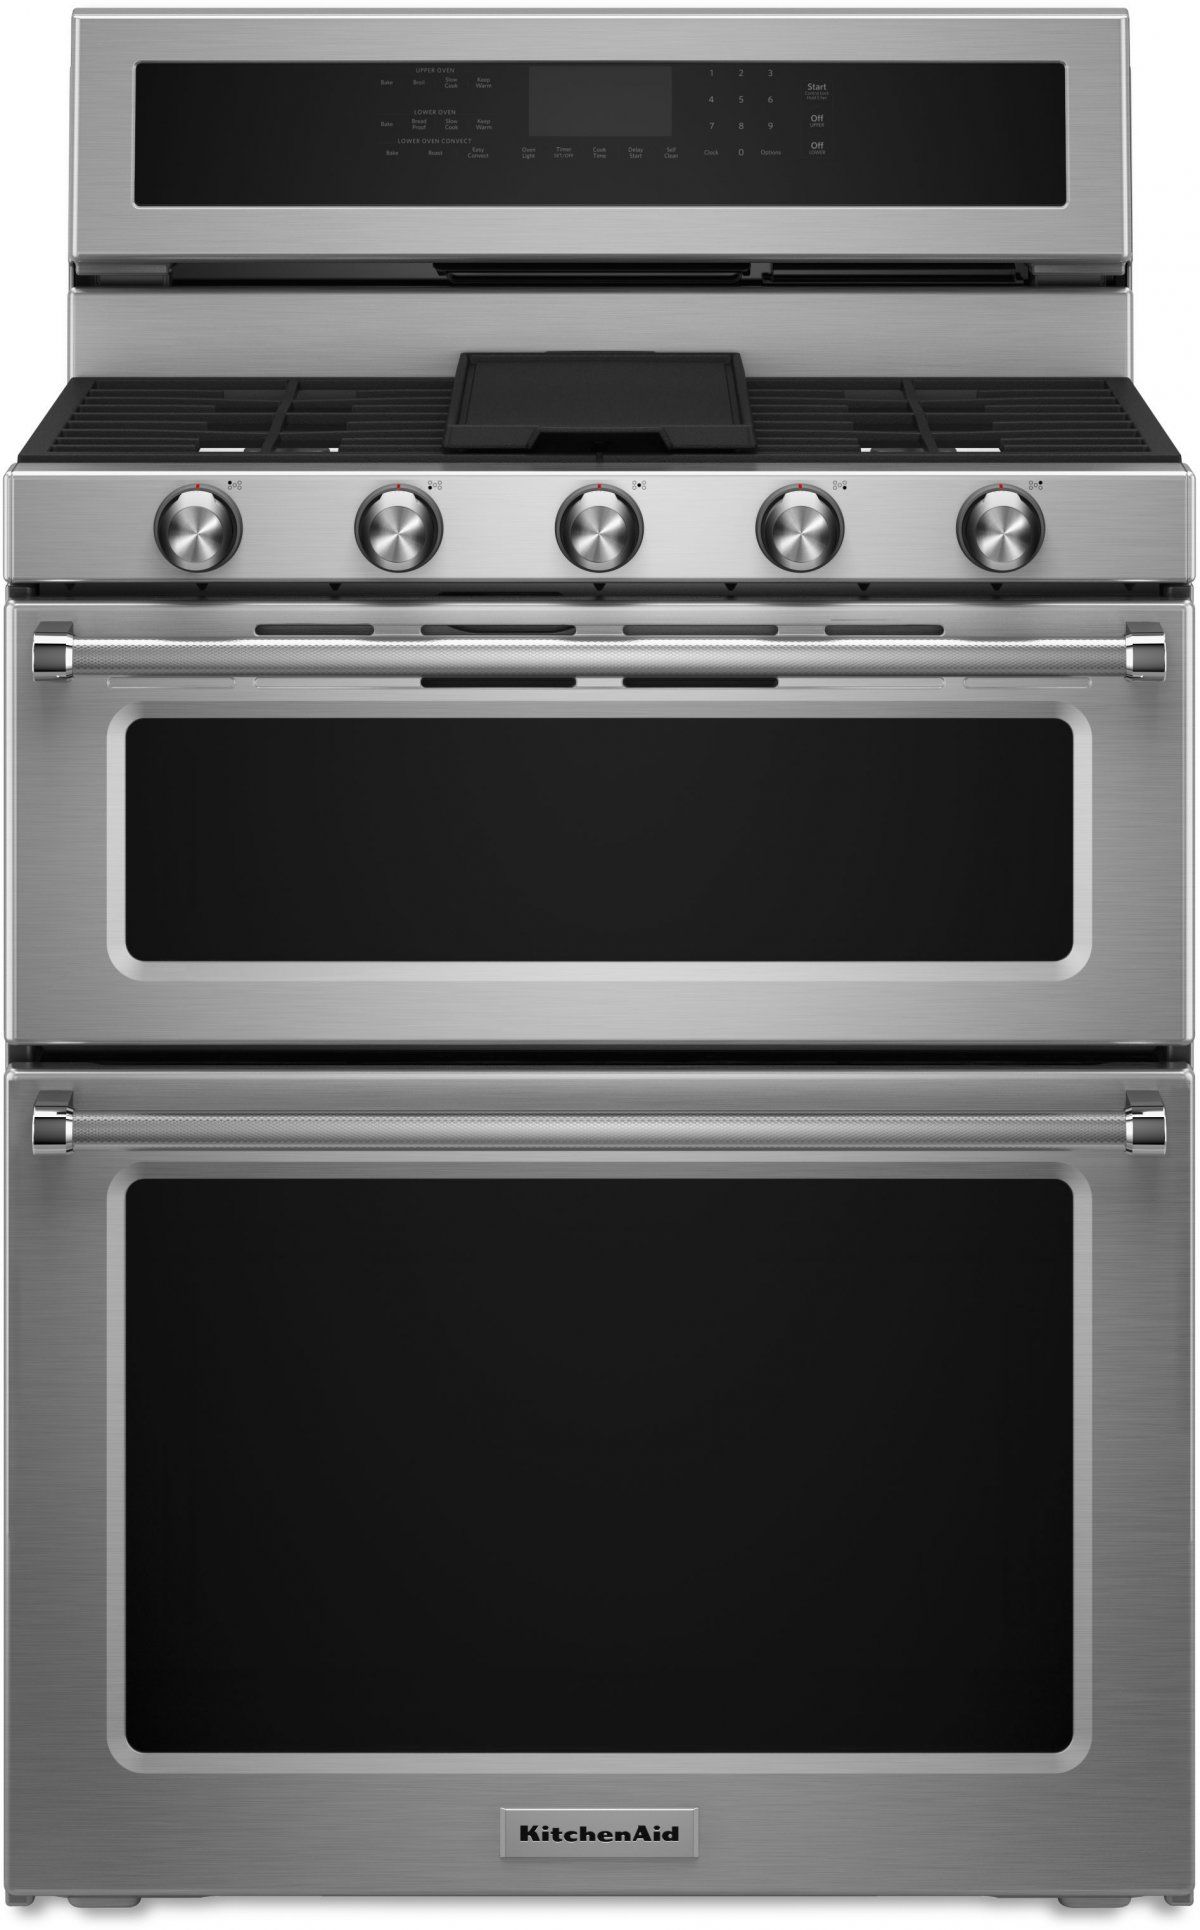 KitchenAid® 30" Stainless Steel Free Standing Dual Fuel Double Oven Range-KFDD500ESS